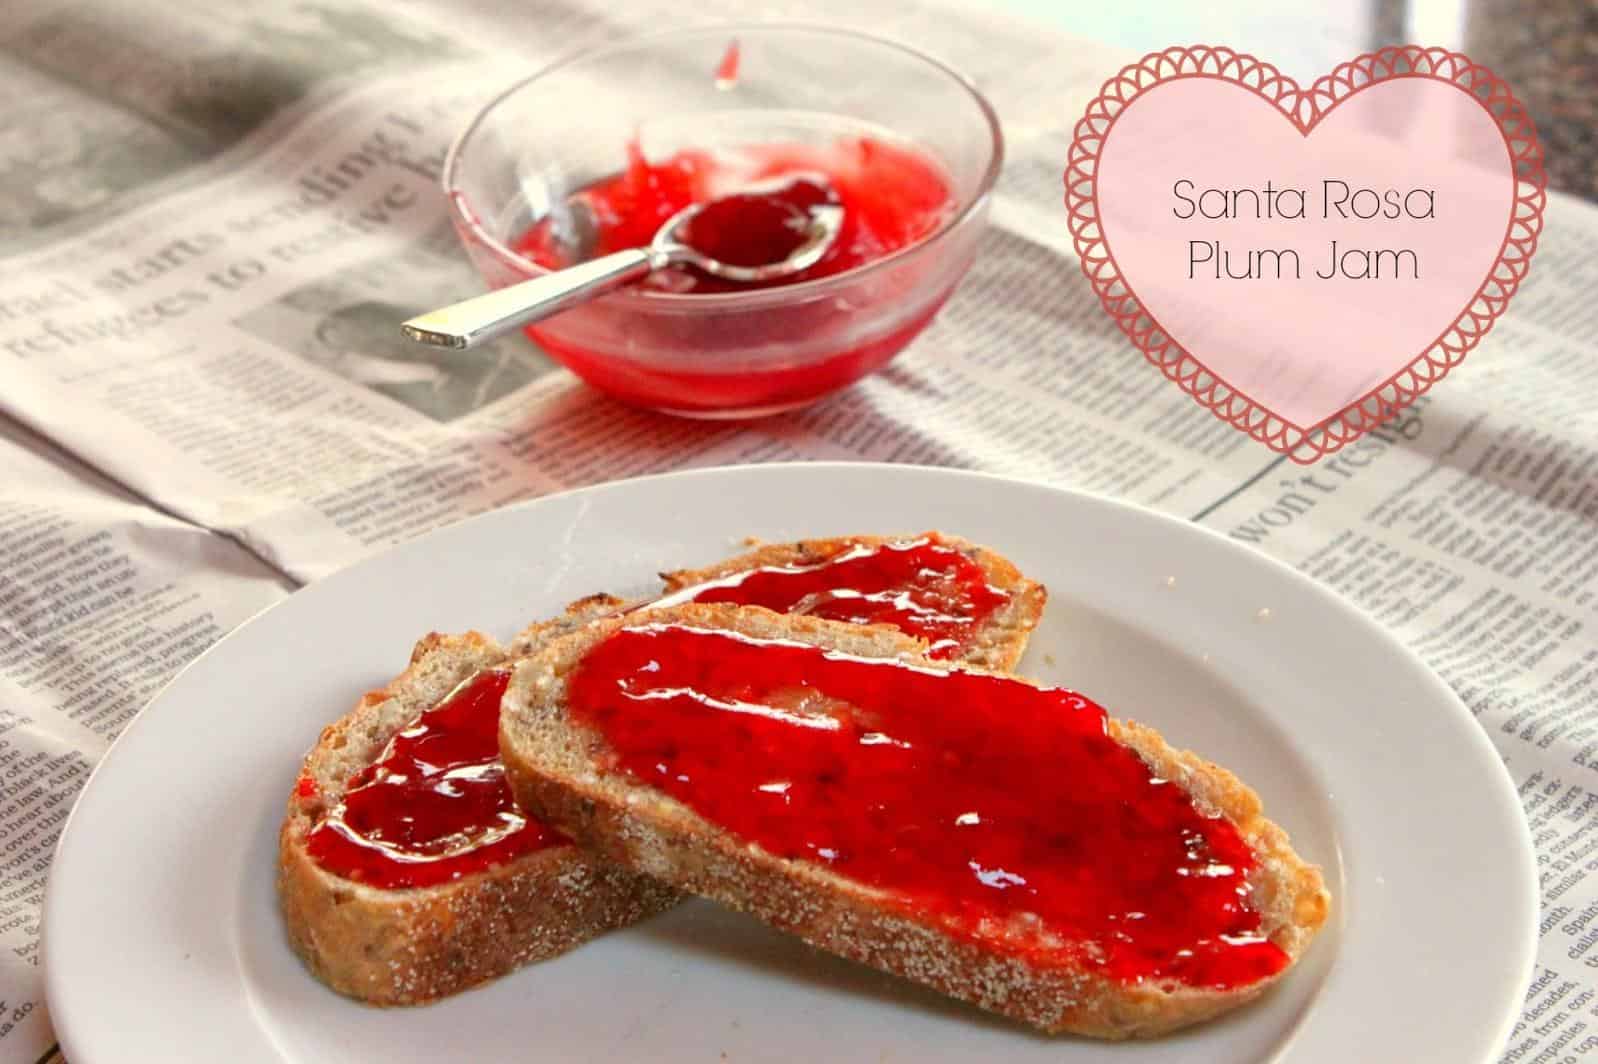  This jam is bursting with the sweet and tart flavors of Santa Rosa plums.